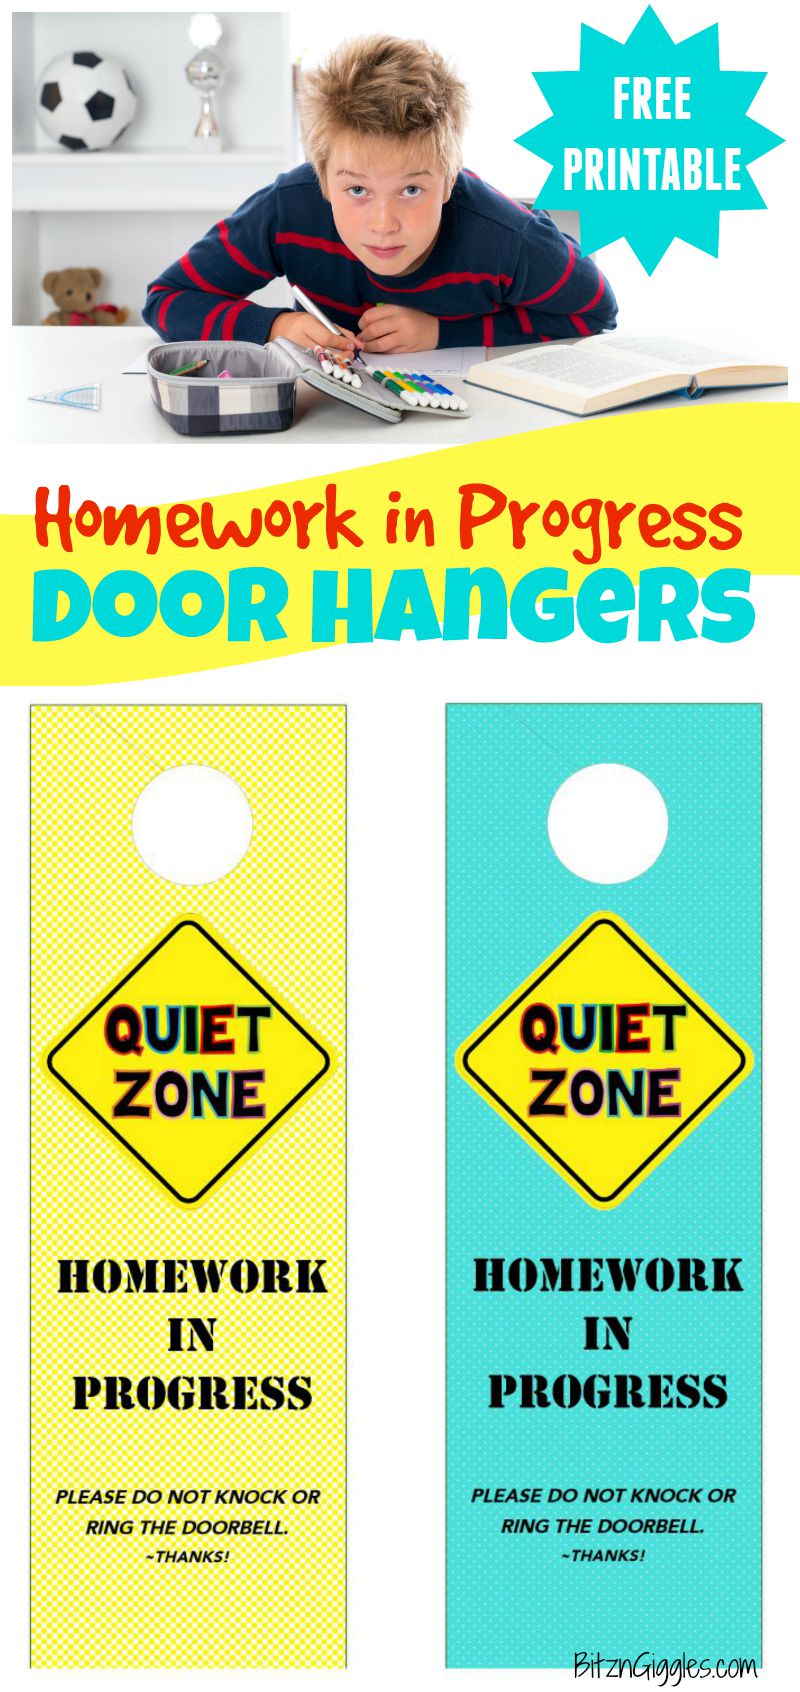 Homework in Progress Door Hangers - Print one out, laminate it and hang it on your door to let neighborhood friends know to stop back later after homework is done! I SO need this for my house!